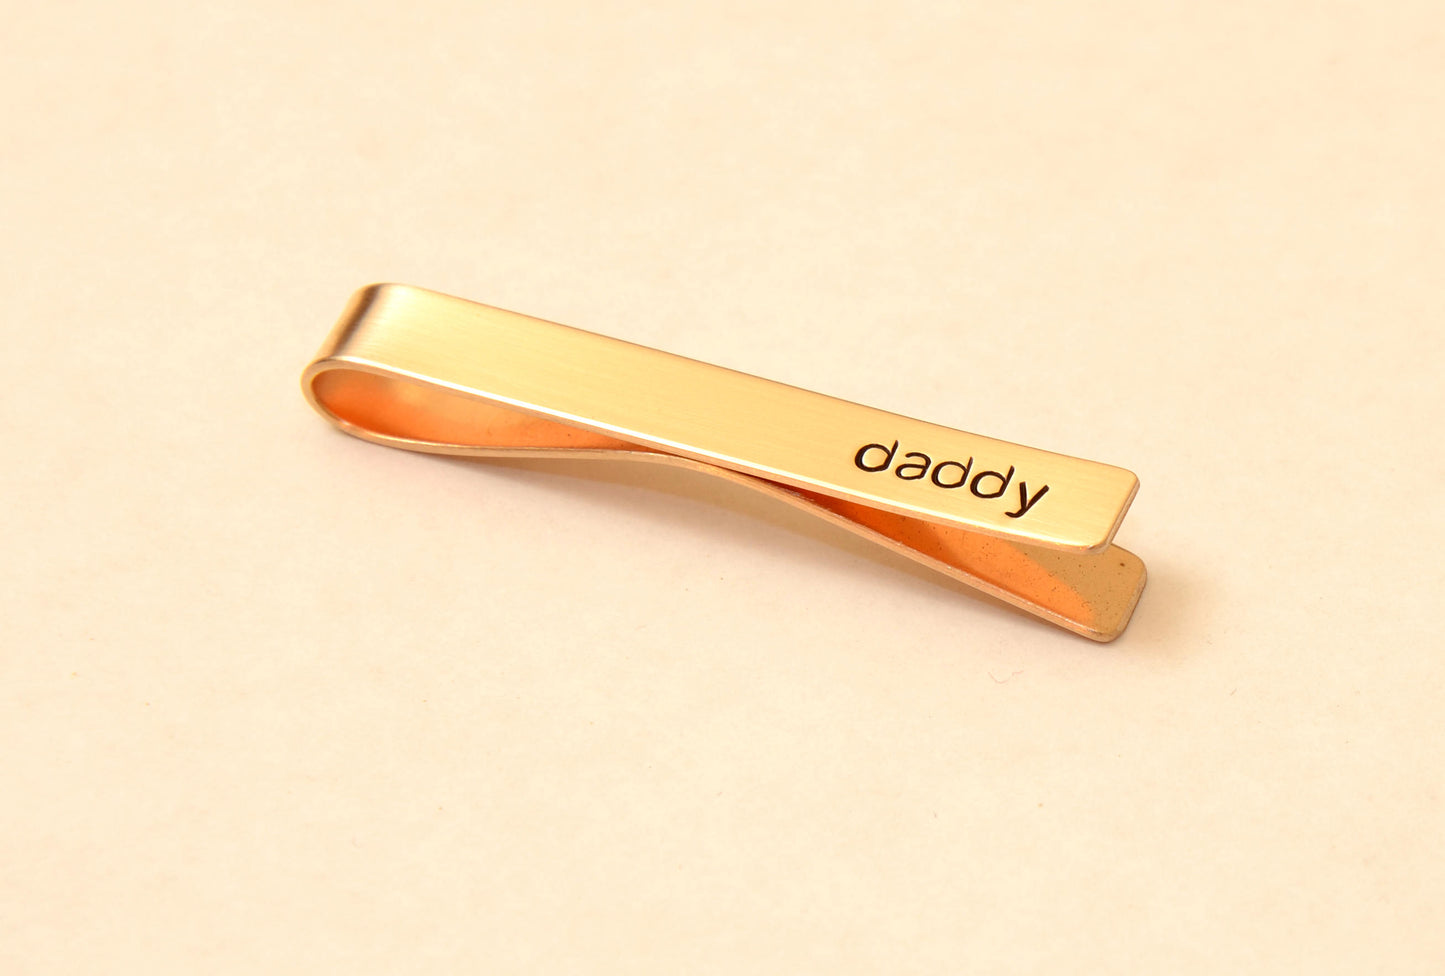 Daddy on a Tie Clip in Bronze with Personalized Messages for that Special Dad